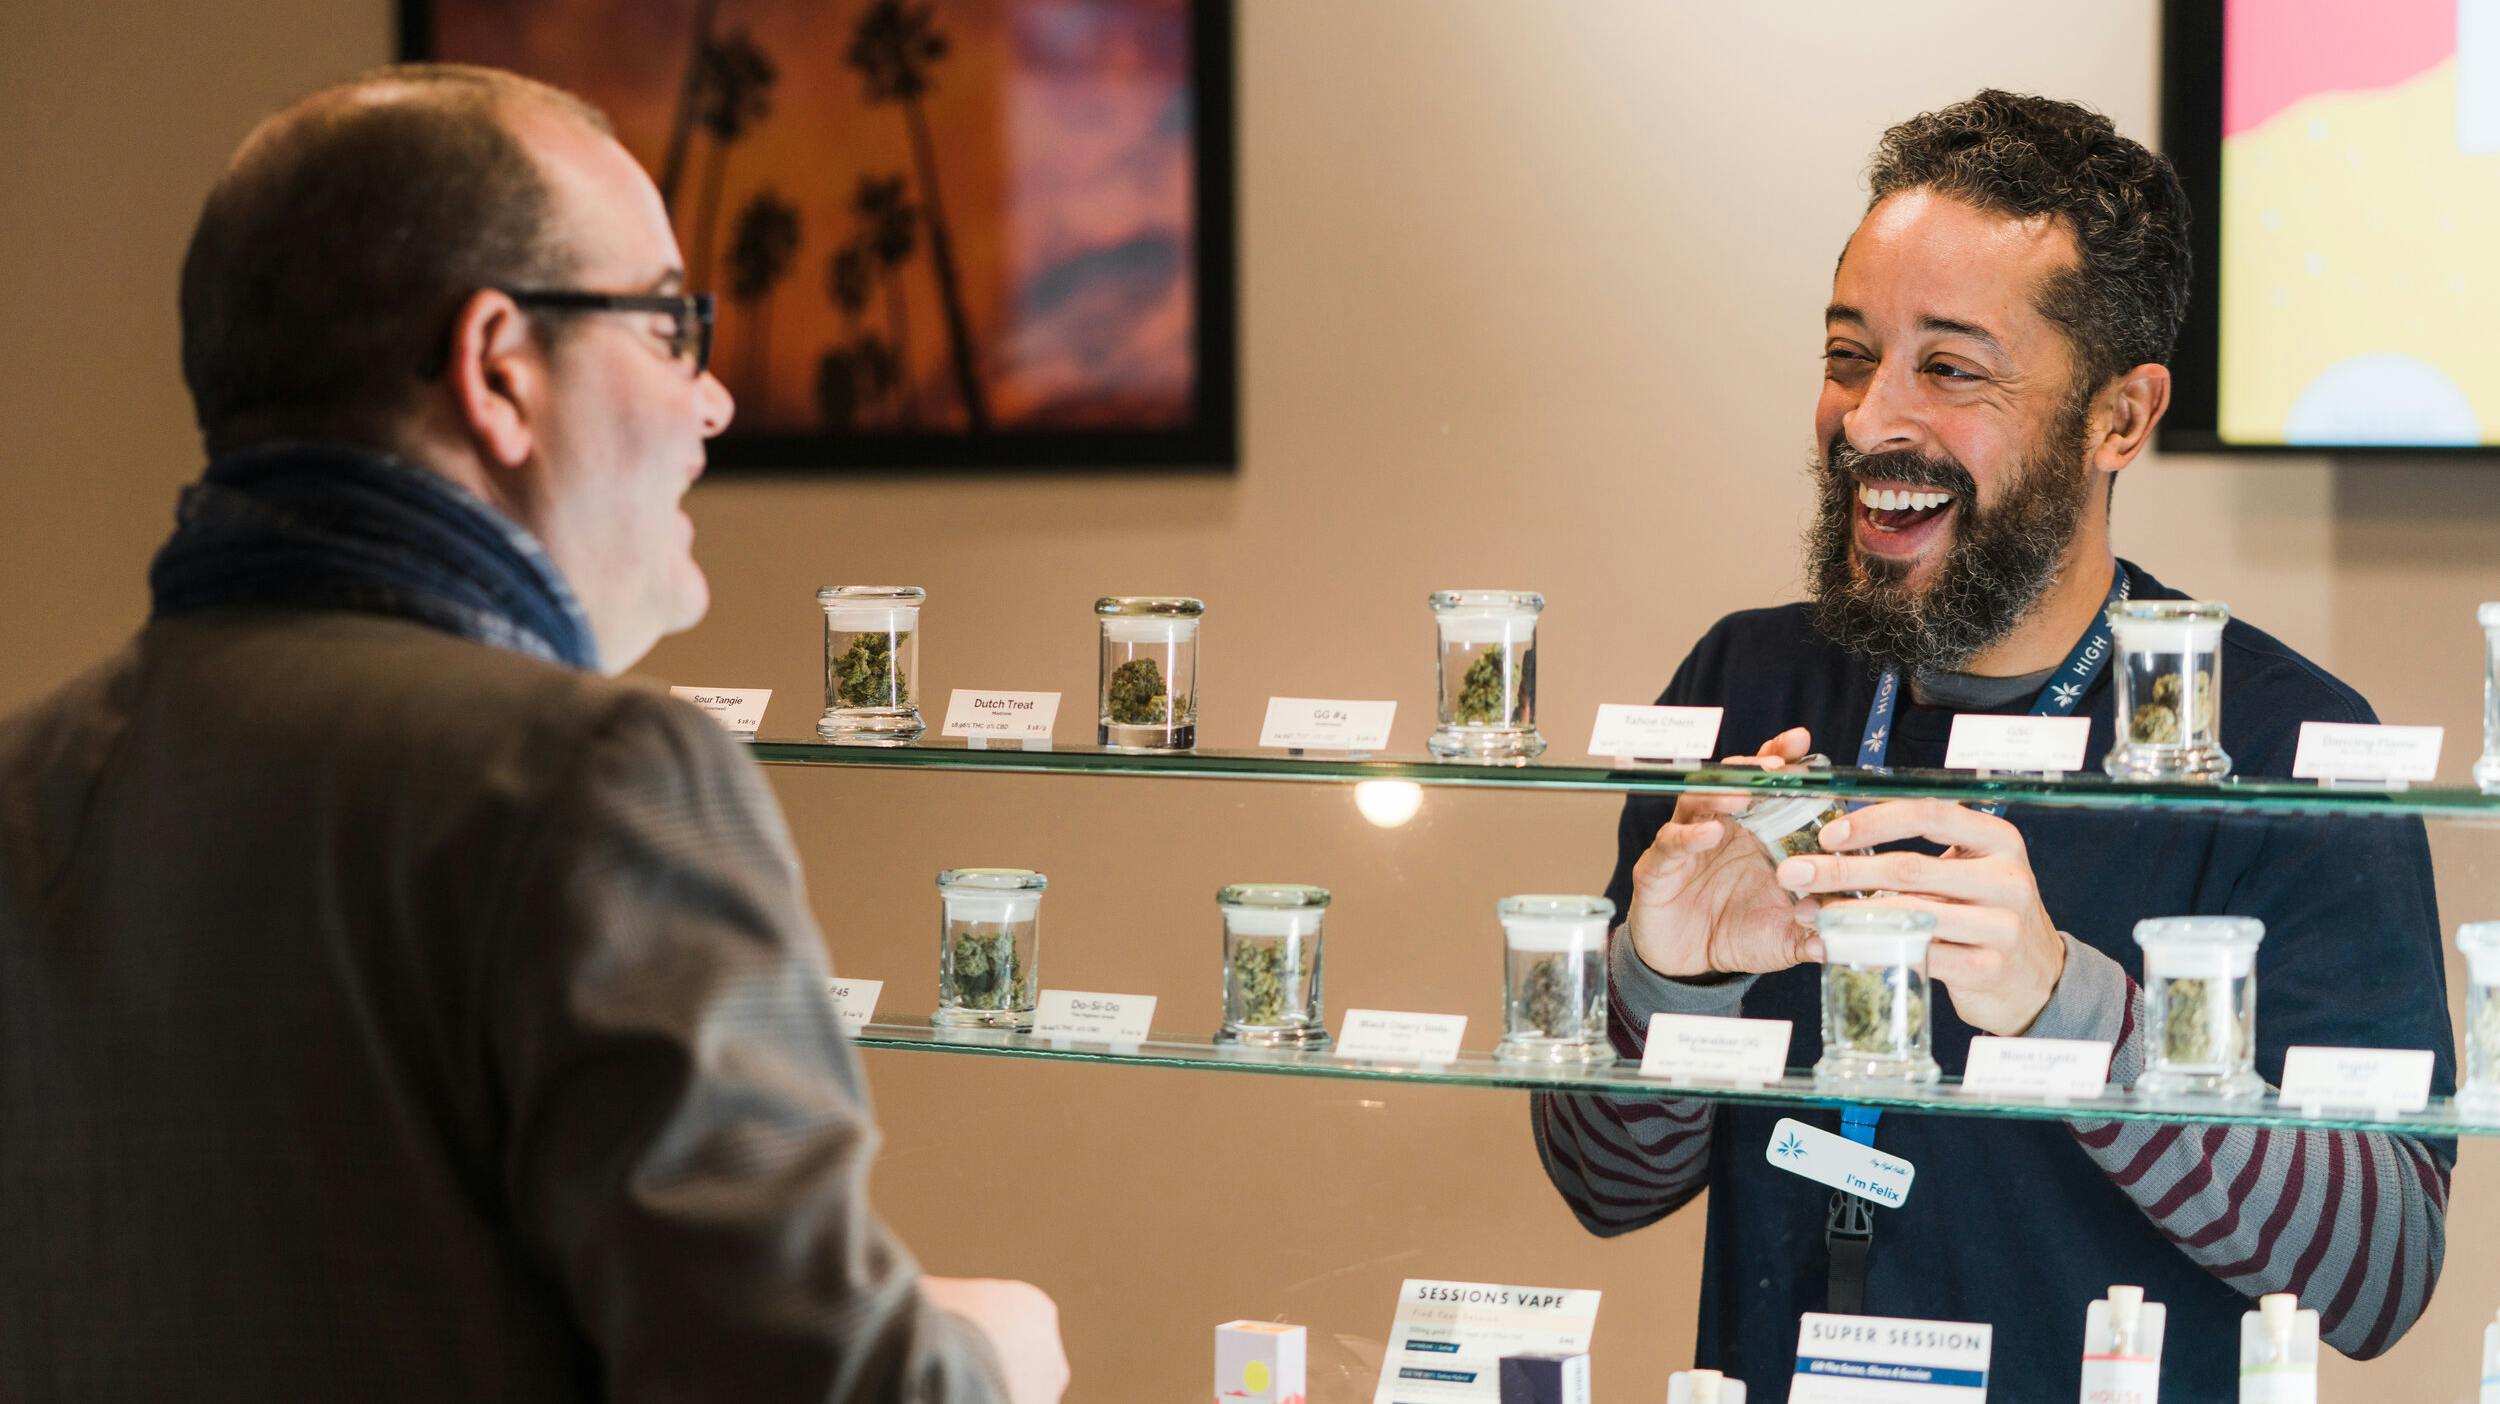 A male customer laughs with a budtender at the Caliva cannabis dispensary in San Jose, California.